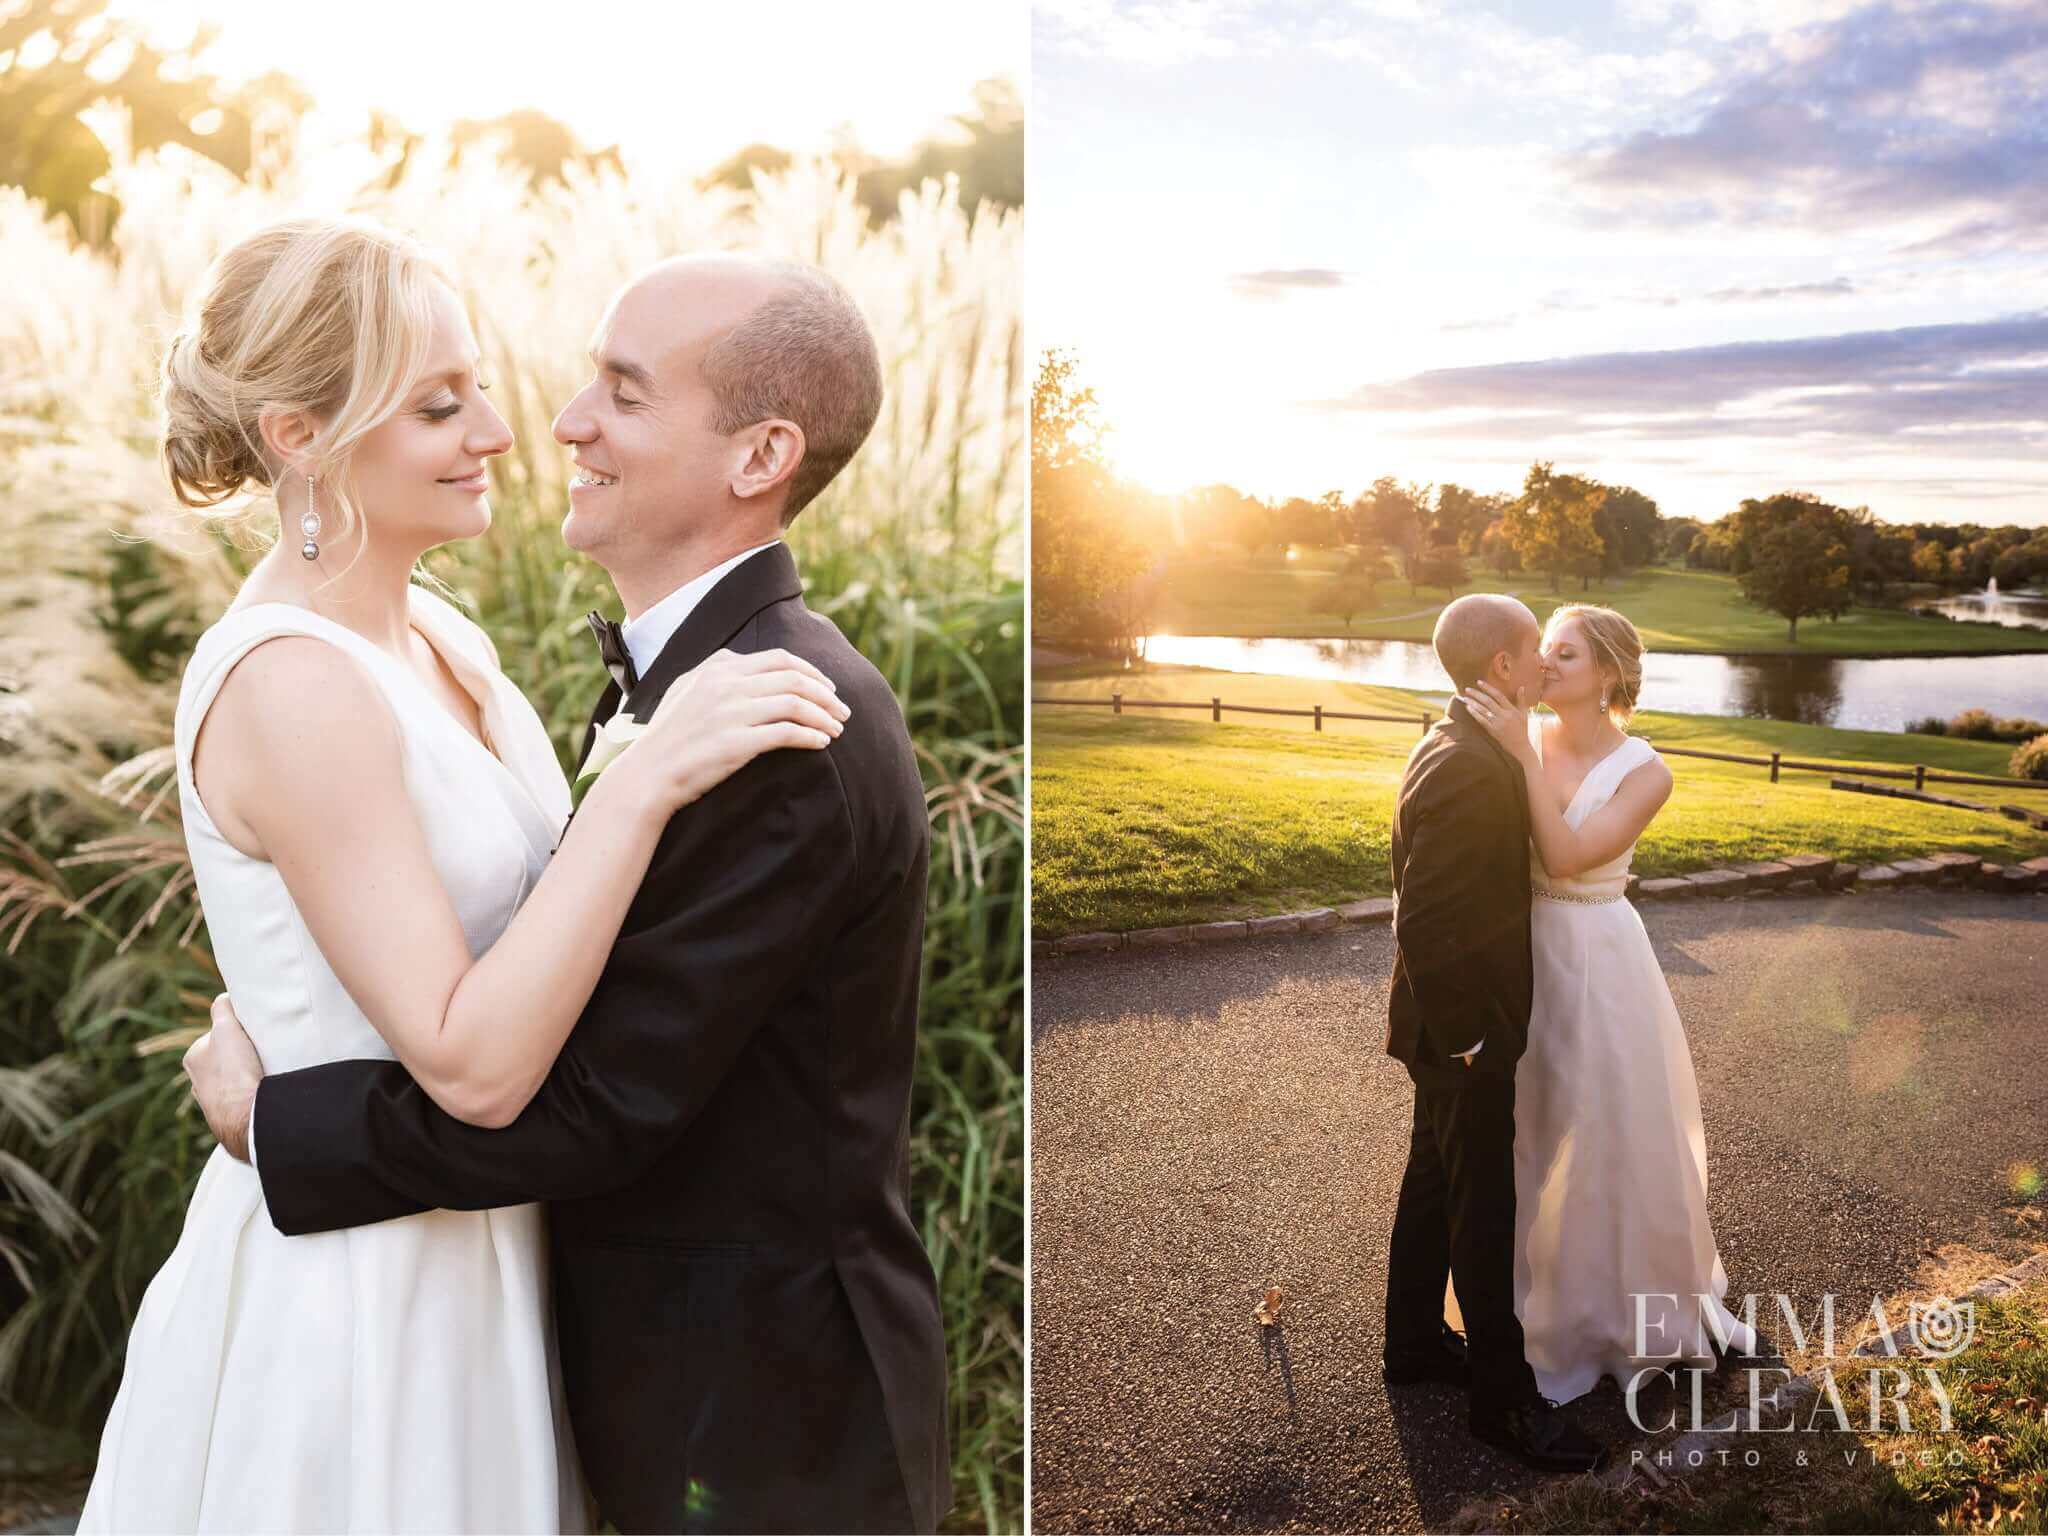 A couple embraces at sunset in front of tall grasses at a romantic New Jersey wedding venue in Florham Park.